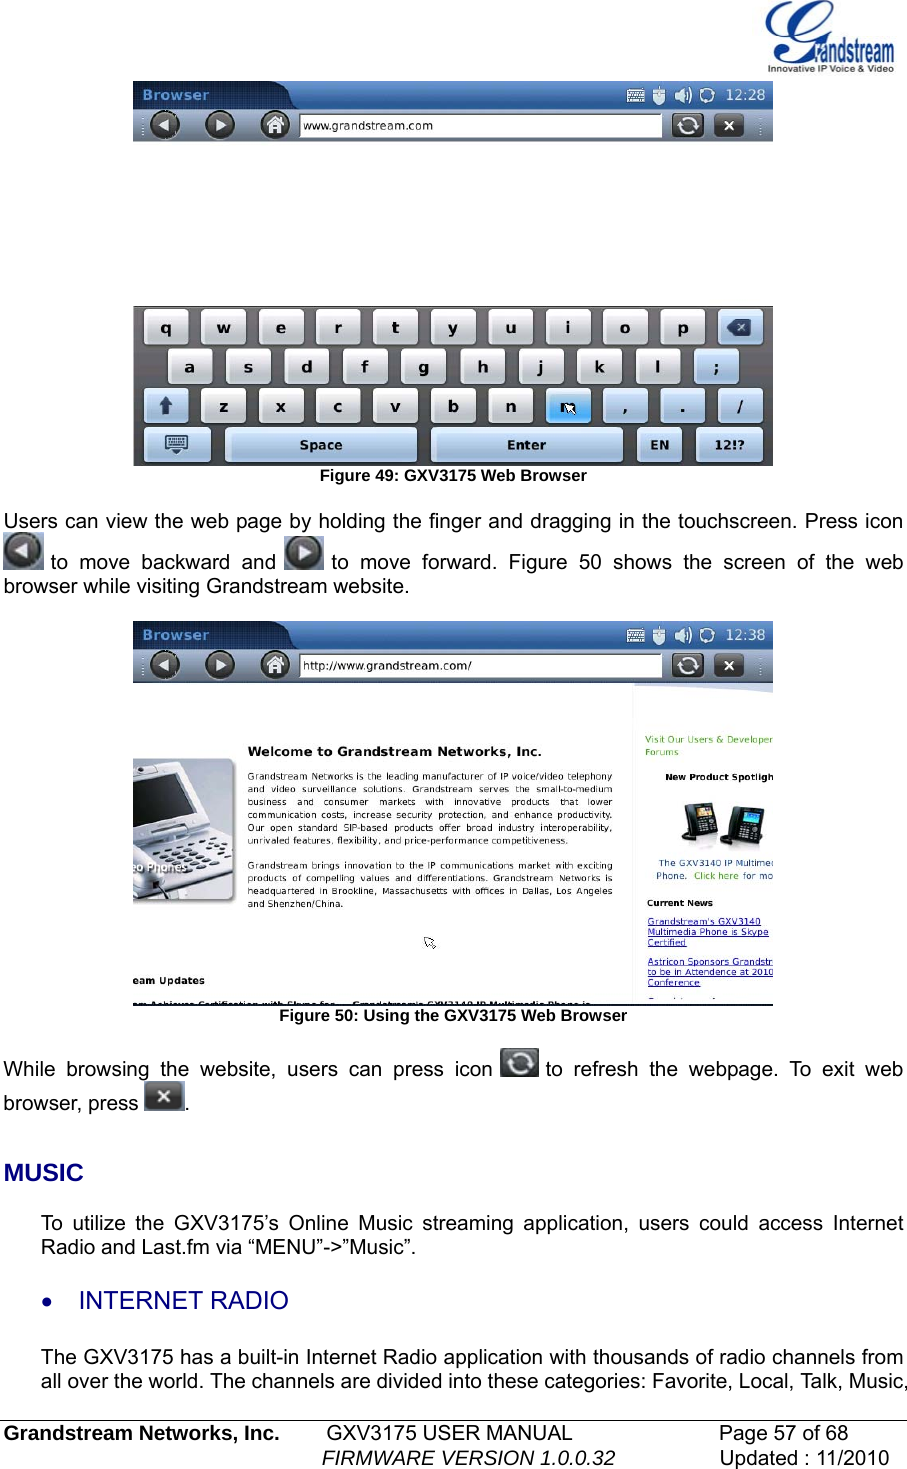    Figure 49: GXV3175 Web Browser  Users can view the web page by holding the finger and dragging in the touchscreen. Press icon  to move backward and   to move forward. Figure 50 shows the screen of the web browser while visiting Grandstream website.   Figure 50: Using the GXV3175 Web Browser  While browsing the website, users can press icon   to refresh the webpage. To exit web browser, press  .   MUSIC  To utilize the GXV3175’s Online Music streaming application, users could access Internet Radio and Last.fm via “MENU”-&gt;”Music”. • INTERNET RADIO  The GXV3175 has a built-in Internet Radio application with thousands of radio channels from all over the world. The channels are divided into these categories: Favorite, Local, Talk, Music, Grandstream Networks, Inc.        GXV3175 USER MANUAL                      Page 57 of 68                                                        FIRMWARE VERSION 1.0.0.32                  Updated : 11/2010  